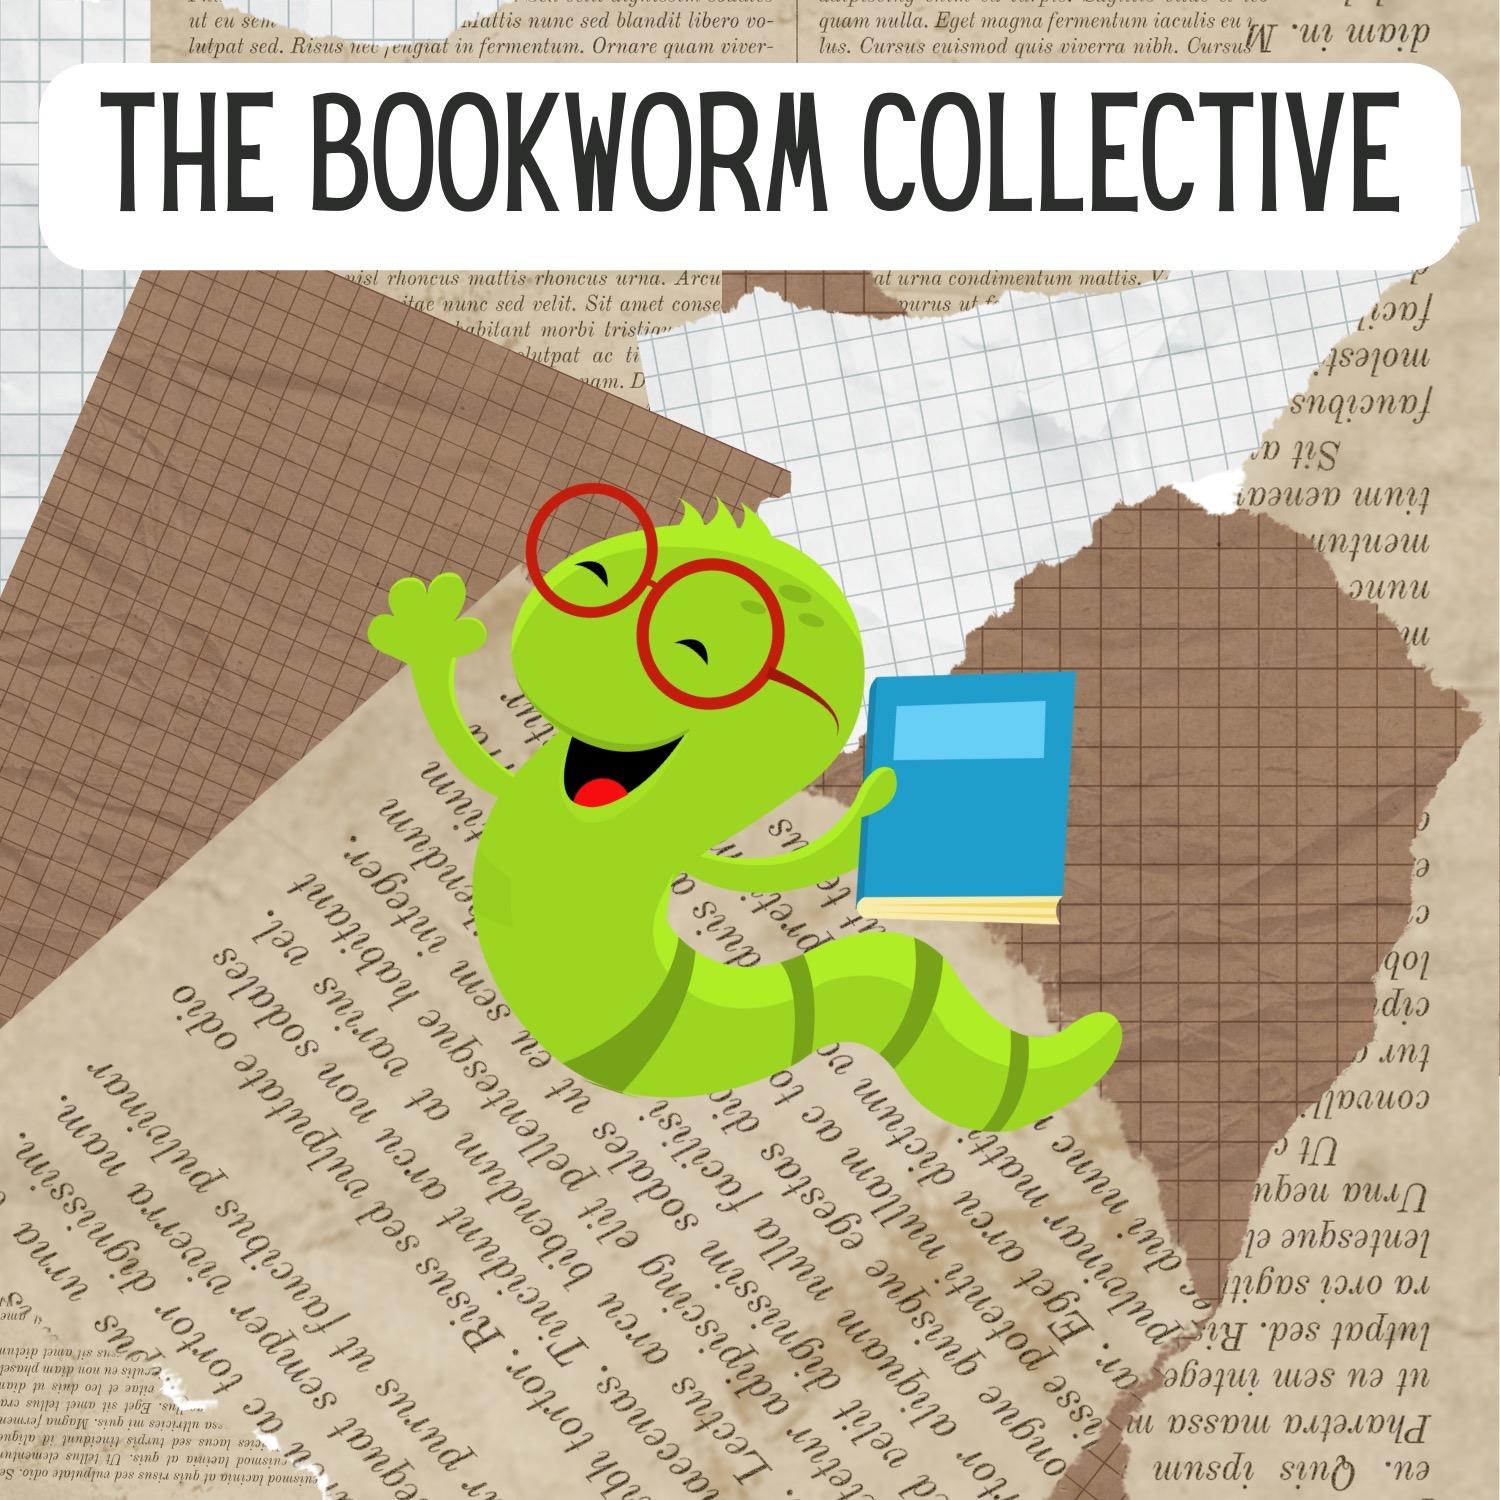 The Bookworm Collective